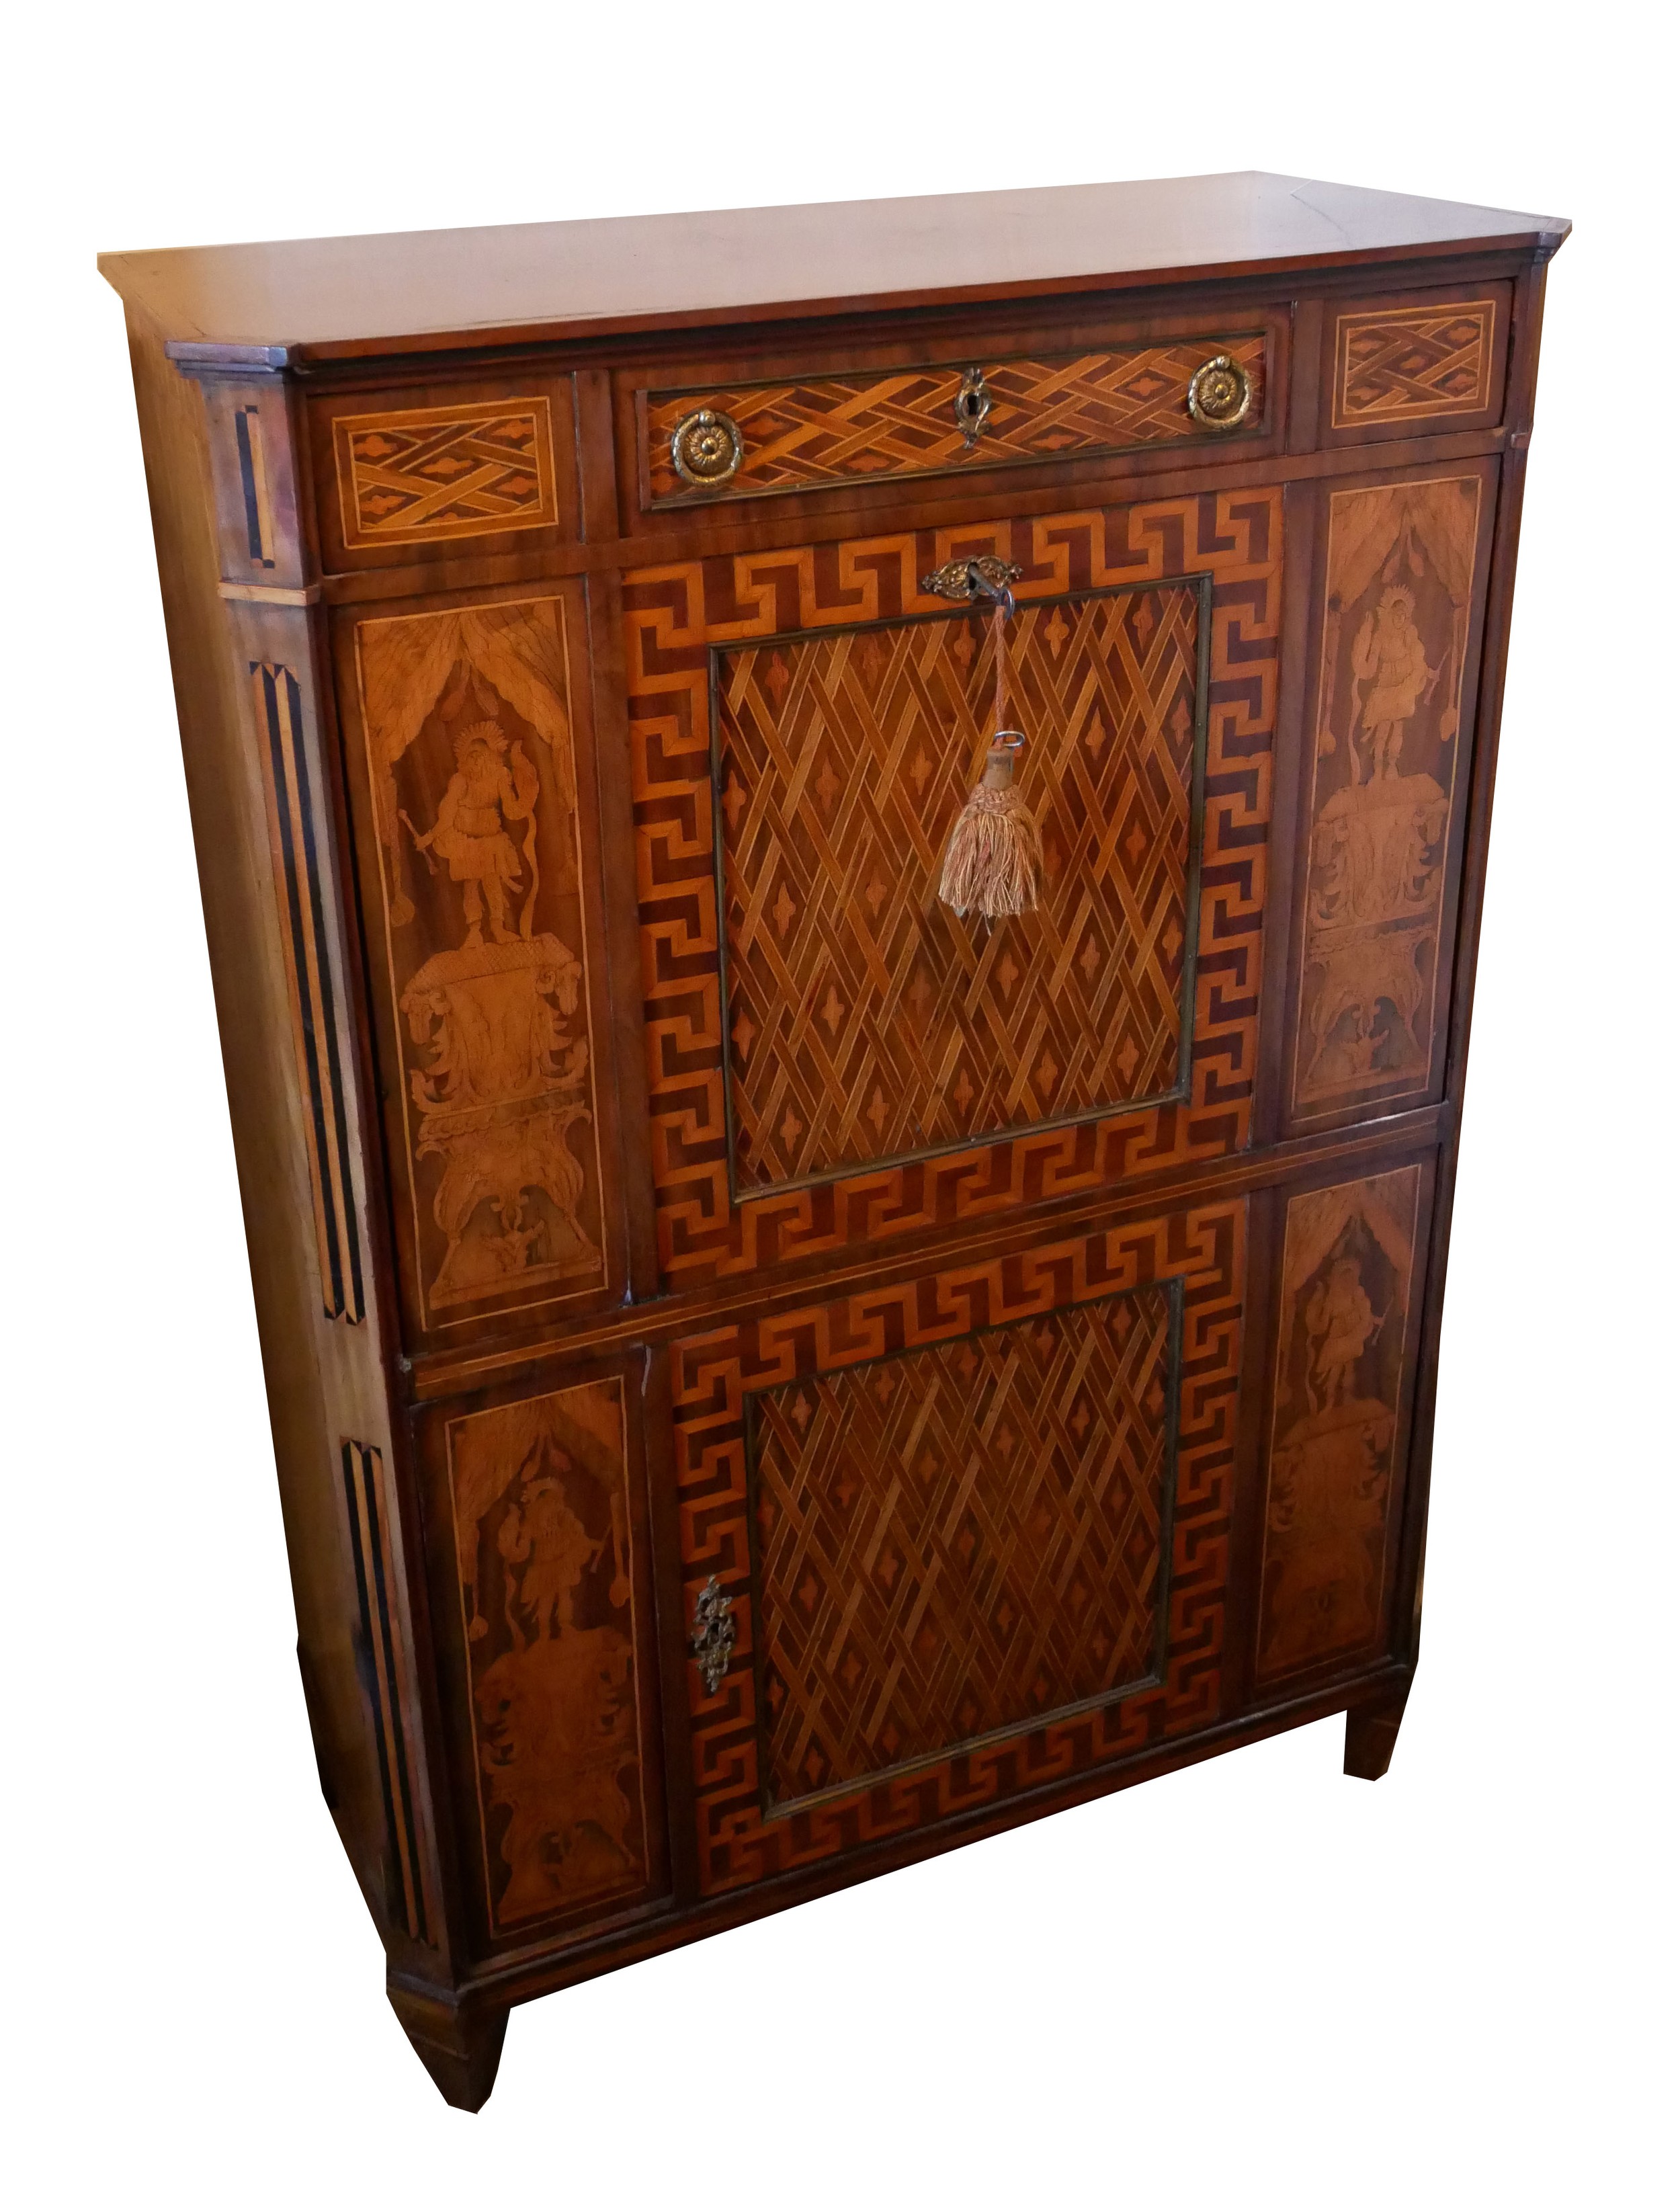 T. WILLSON OF QUEEN STREET, LONDON, A FINE EARLY 19TH CENTURY MAHOGANY AND SATINWOOD MARQUETRY - Bild 2 aus 12